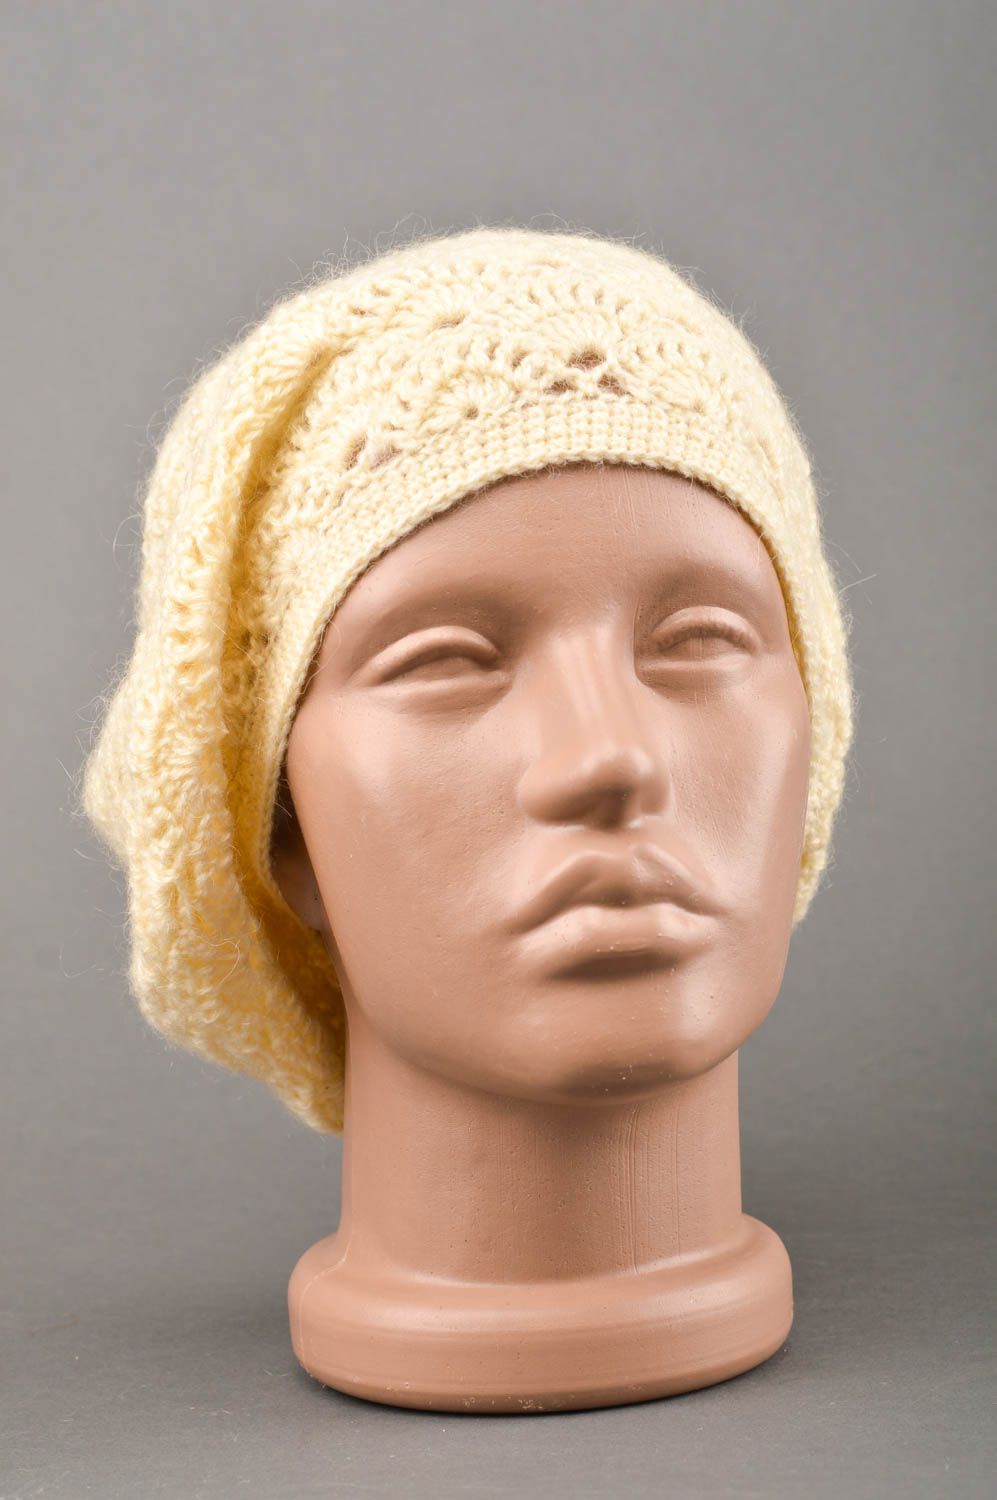 Winter hat for women handmade crochet hat fashion accessories gifts for women photo 1